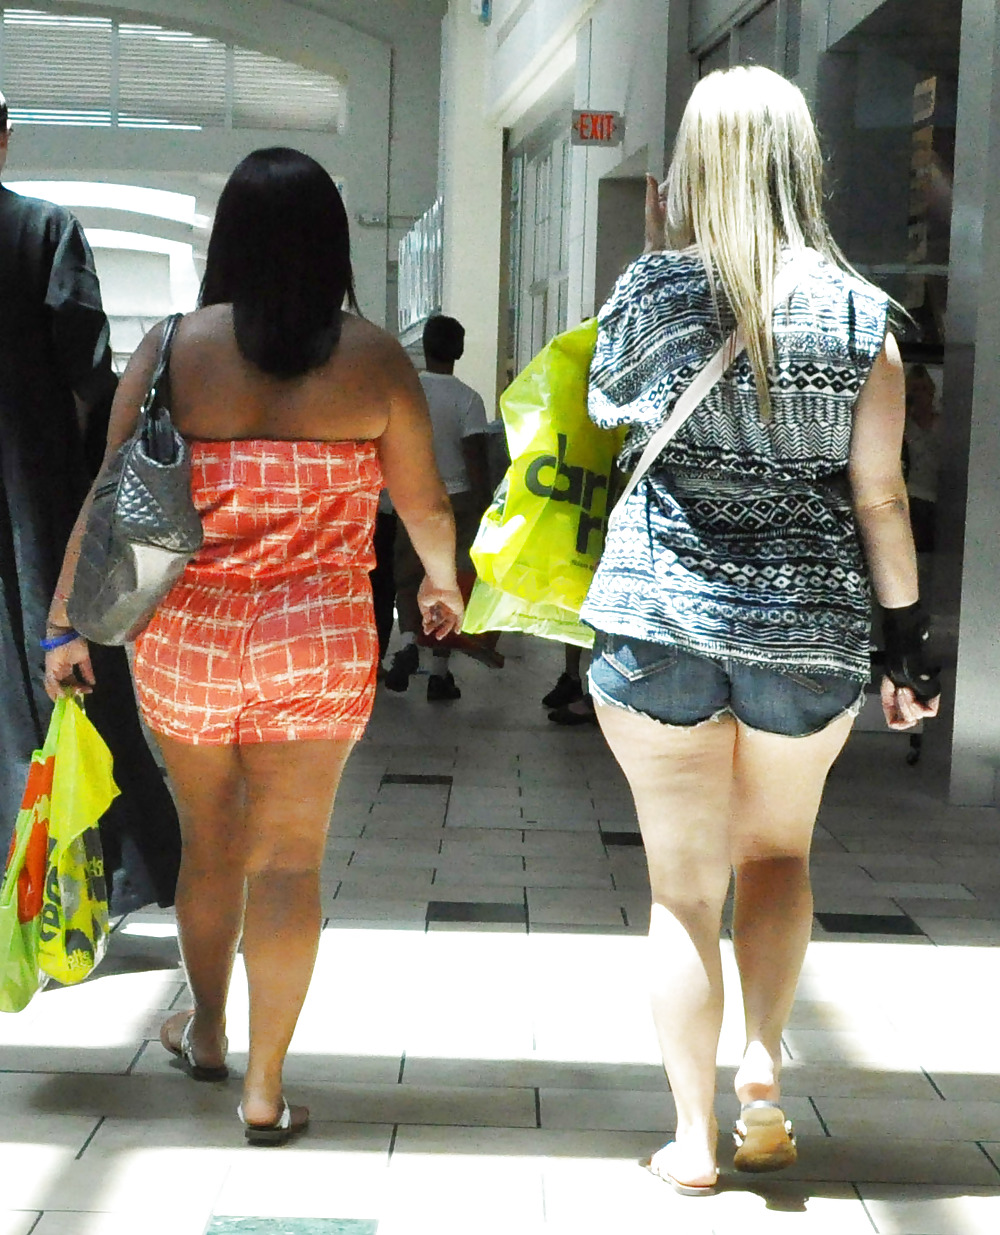 BBW's in Public - Juciy Fat Asses porn pictures